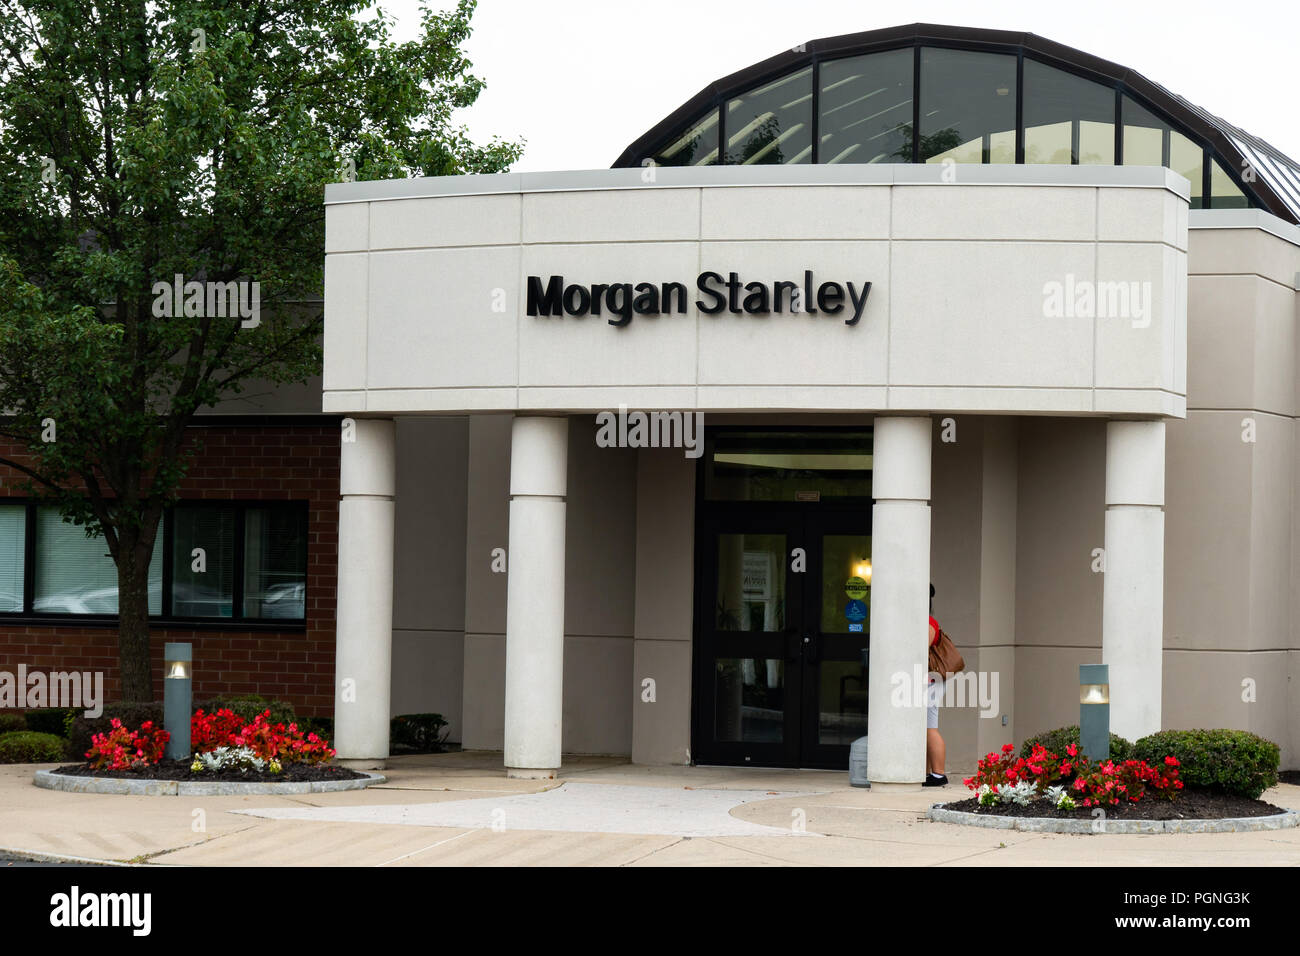 A Morgan Stanley office building in New Hartford, NY USA with trees and flowers. Stock Photo